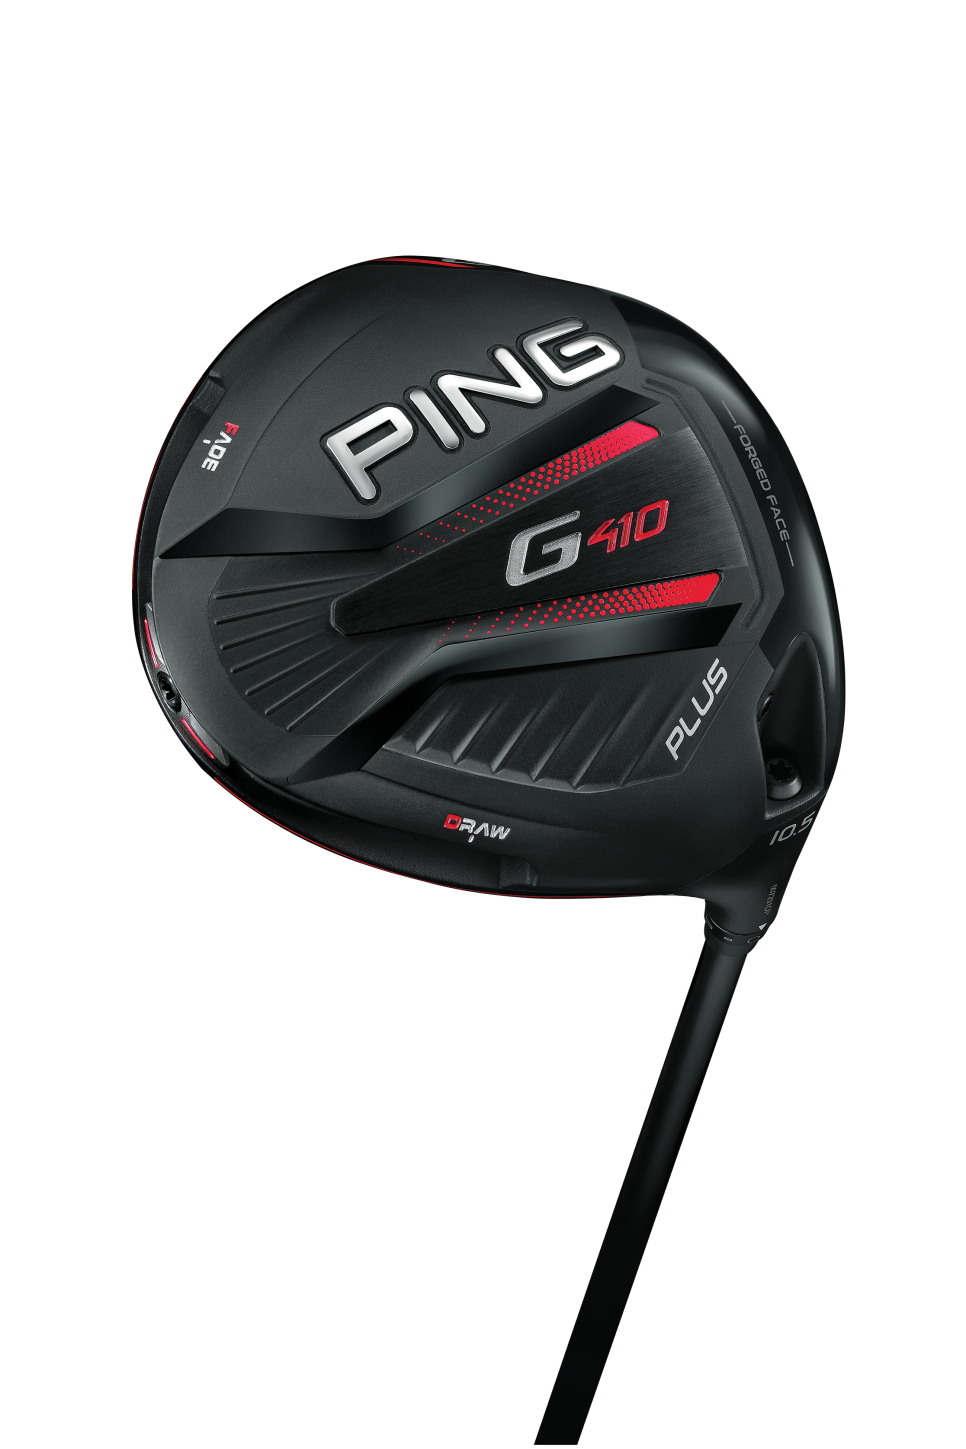 New Ping G410 driver adds adjustable center of gravity with 